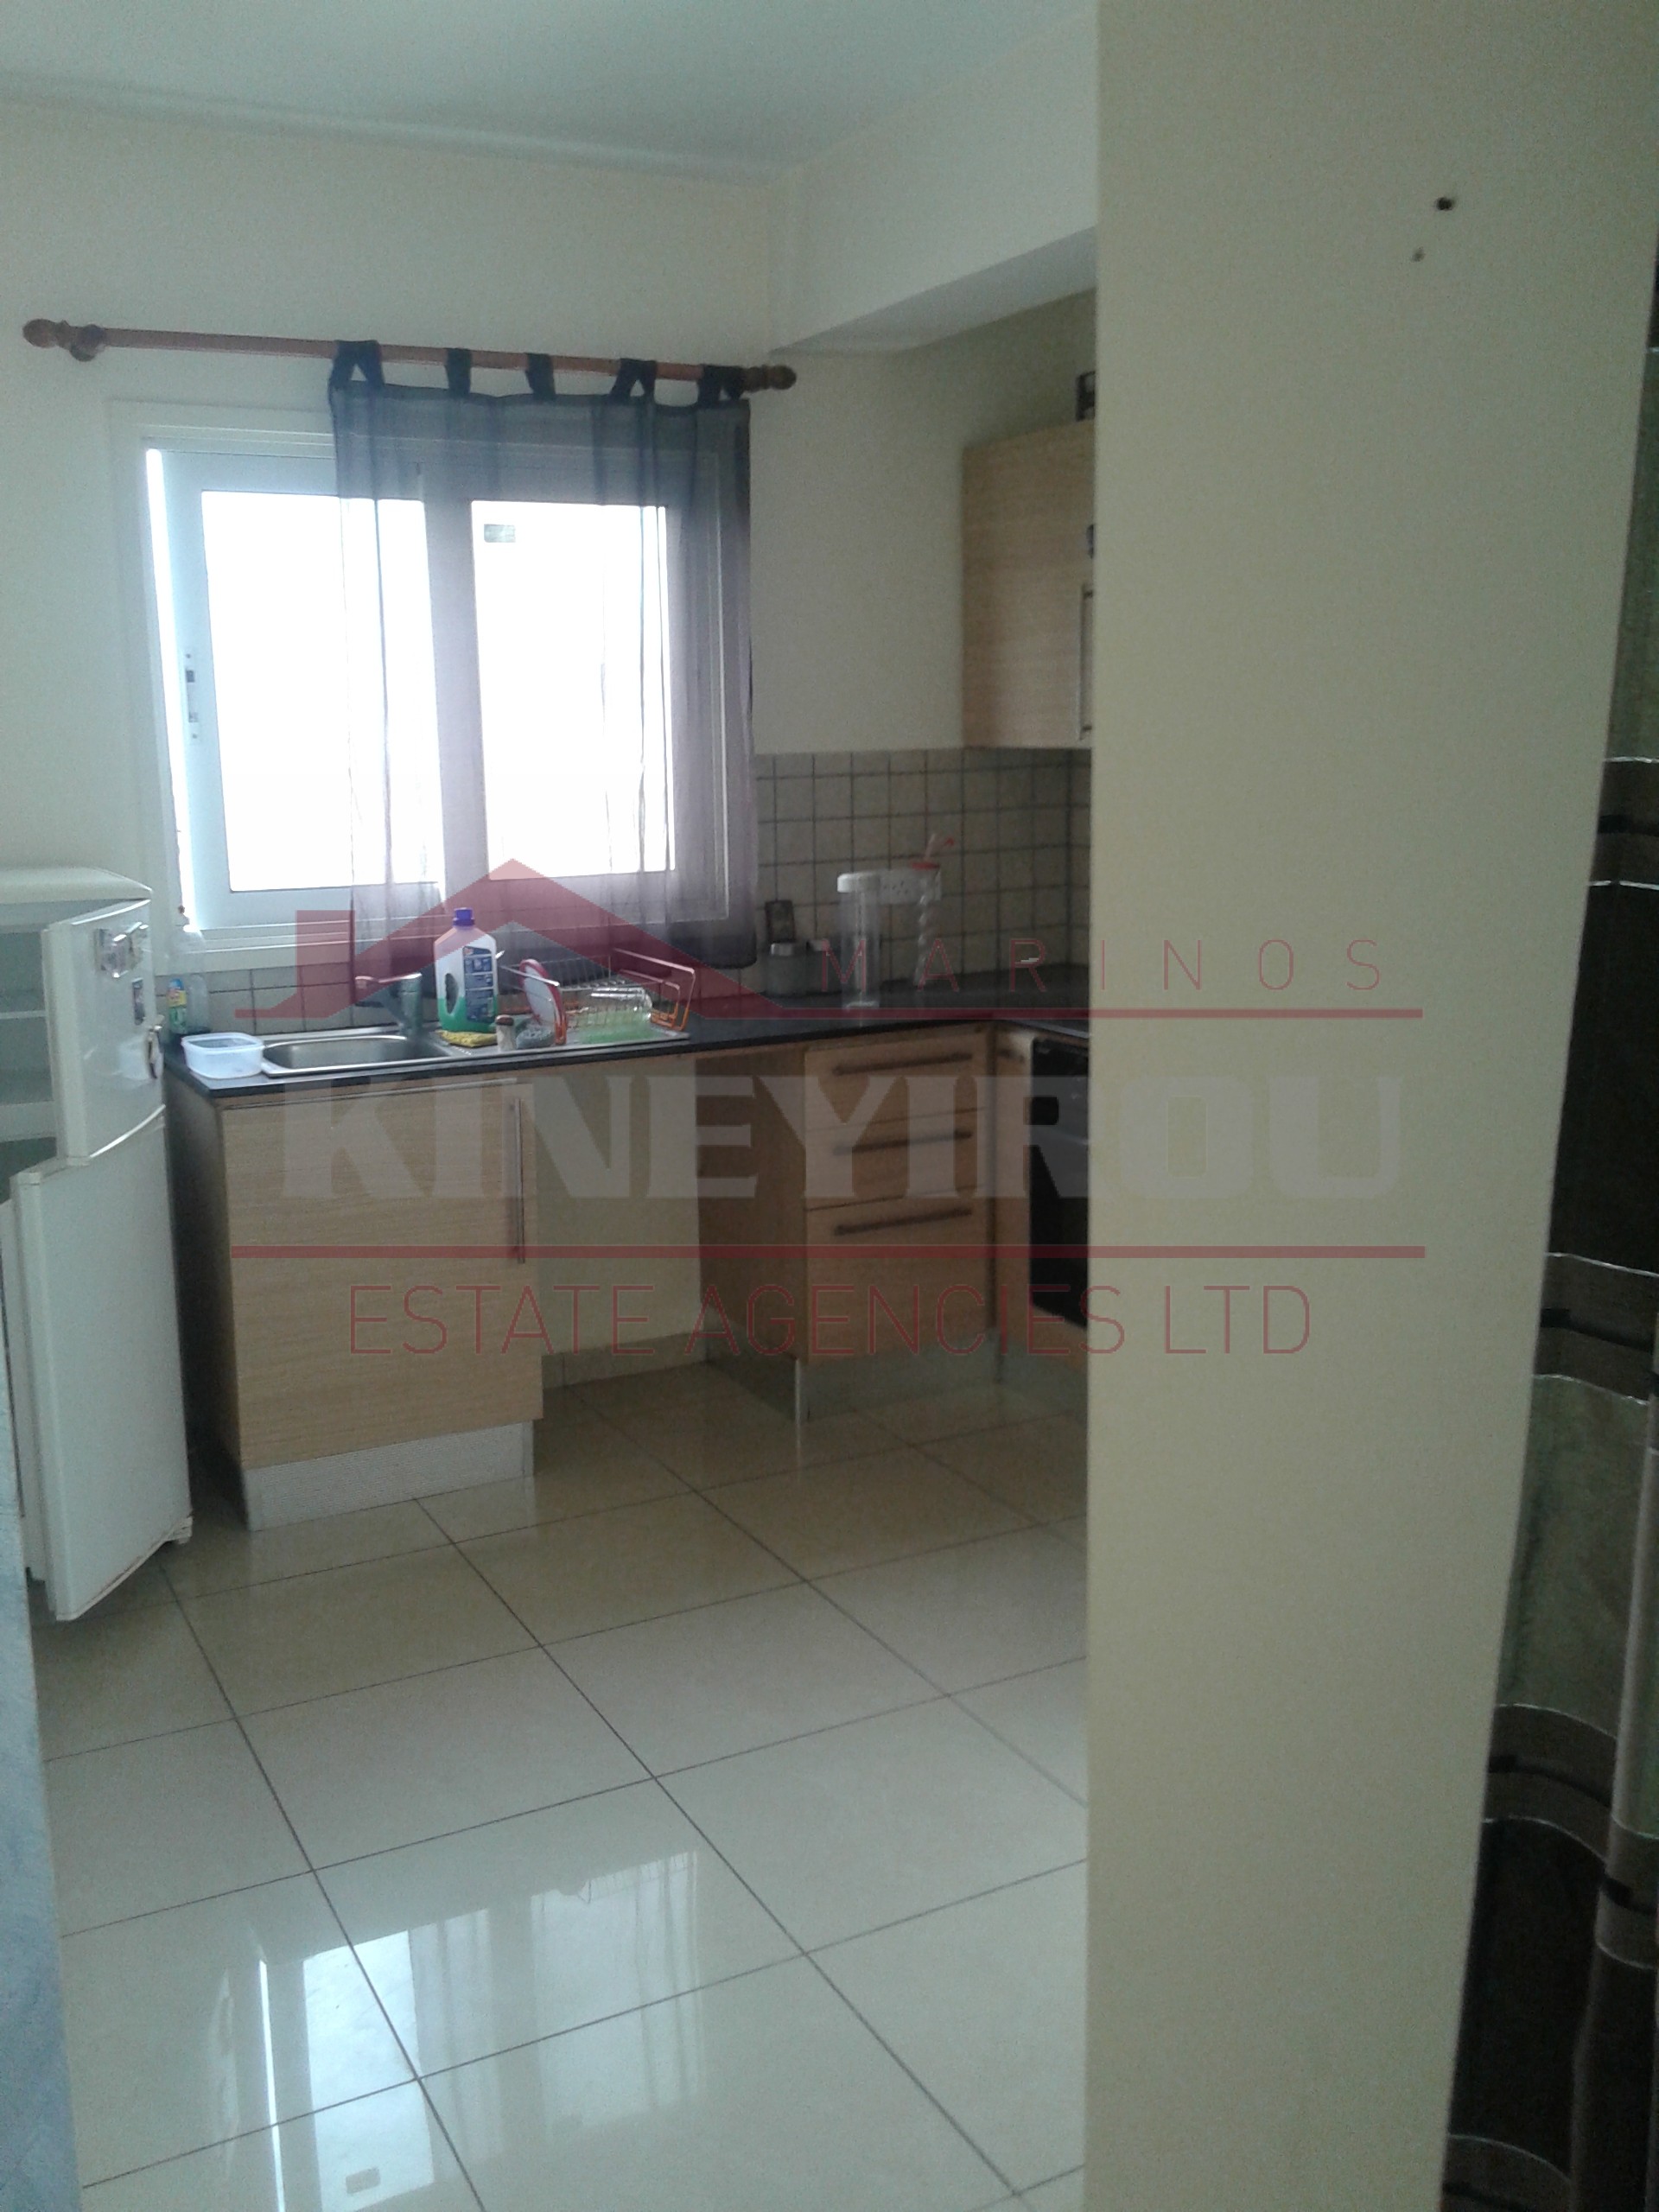 Two bedroom penthouse for rent in Drosia – Larnaca